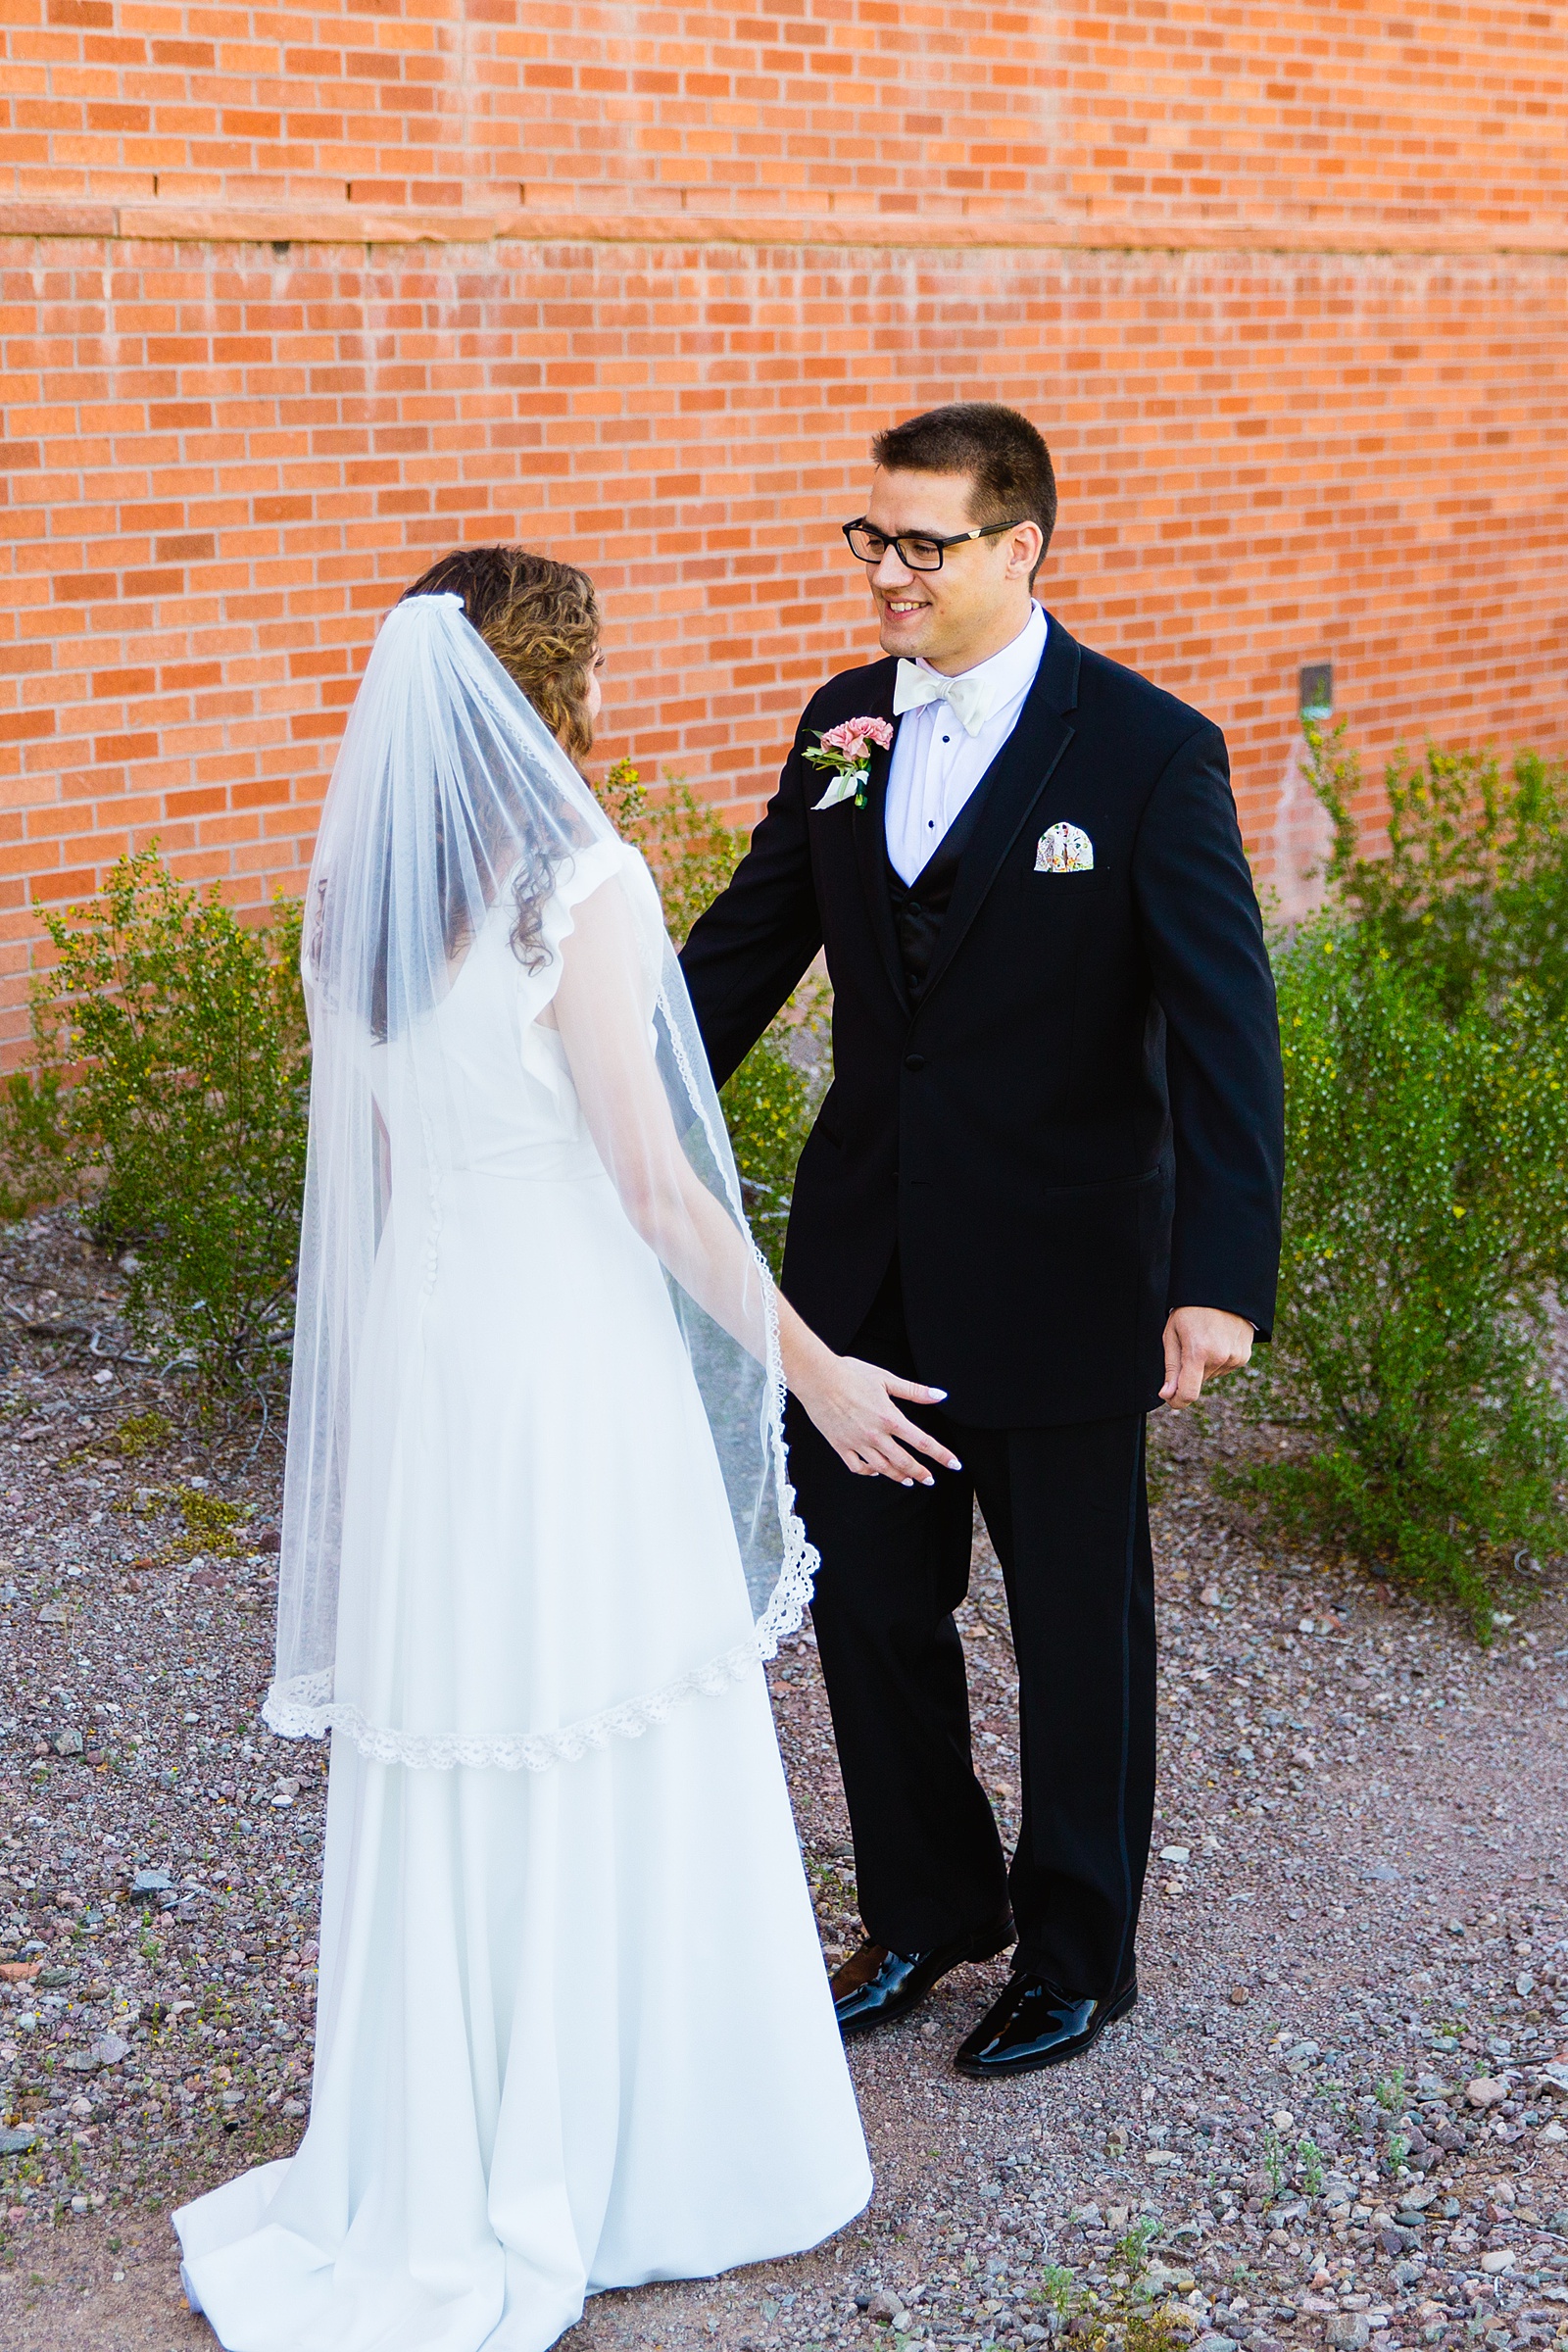 Bride and groom's first look at Arizona Historical Society by Phoenix wedding photographer PMA Photography.